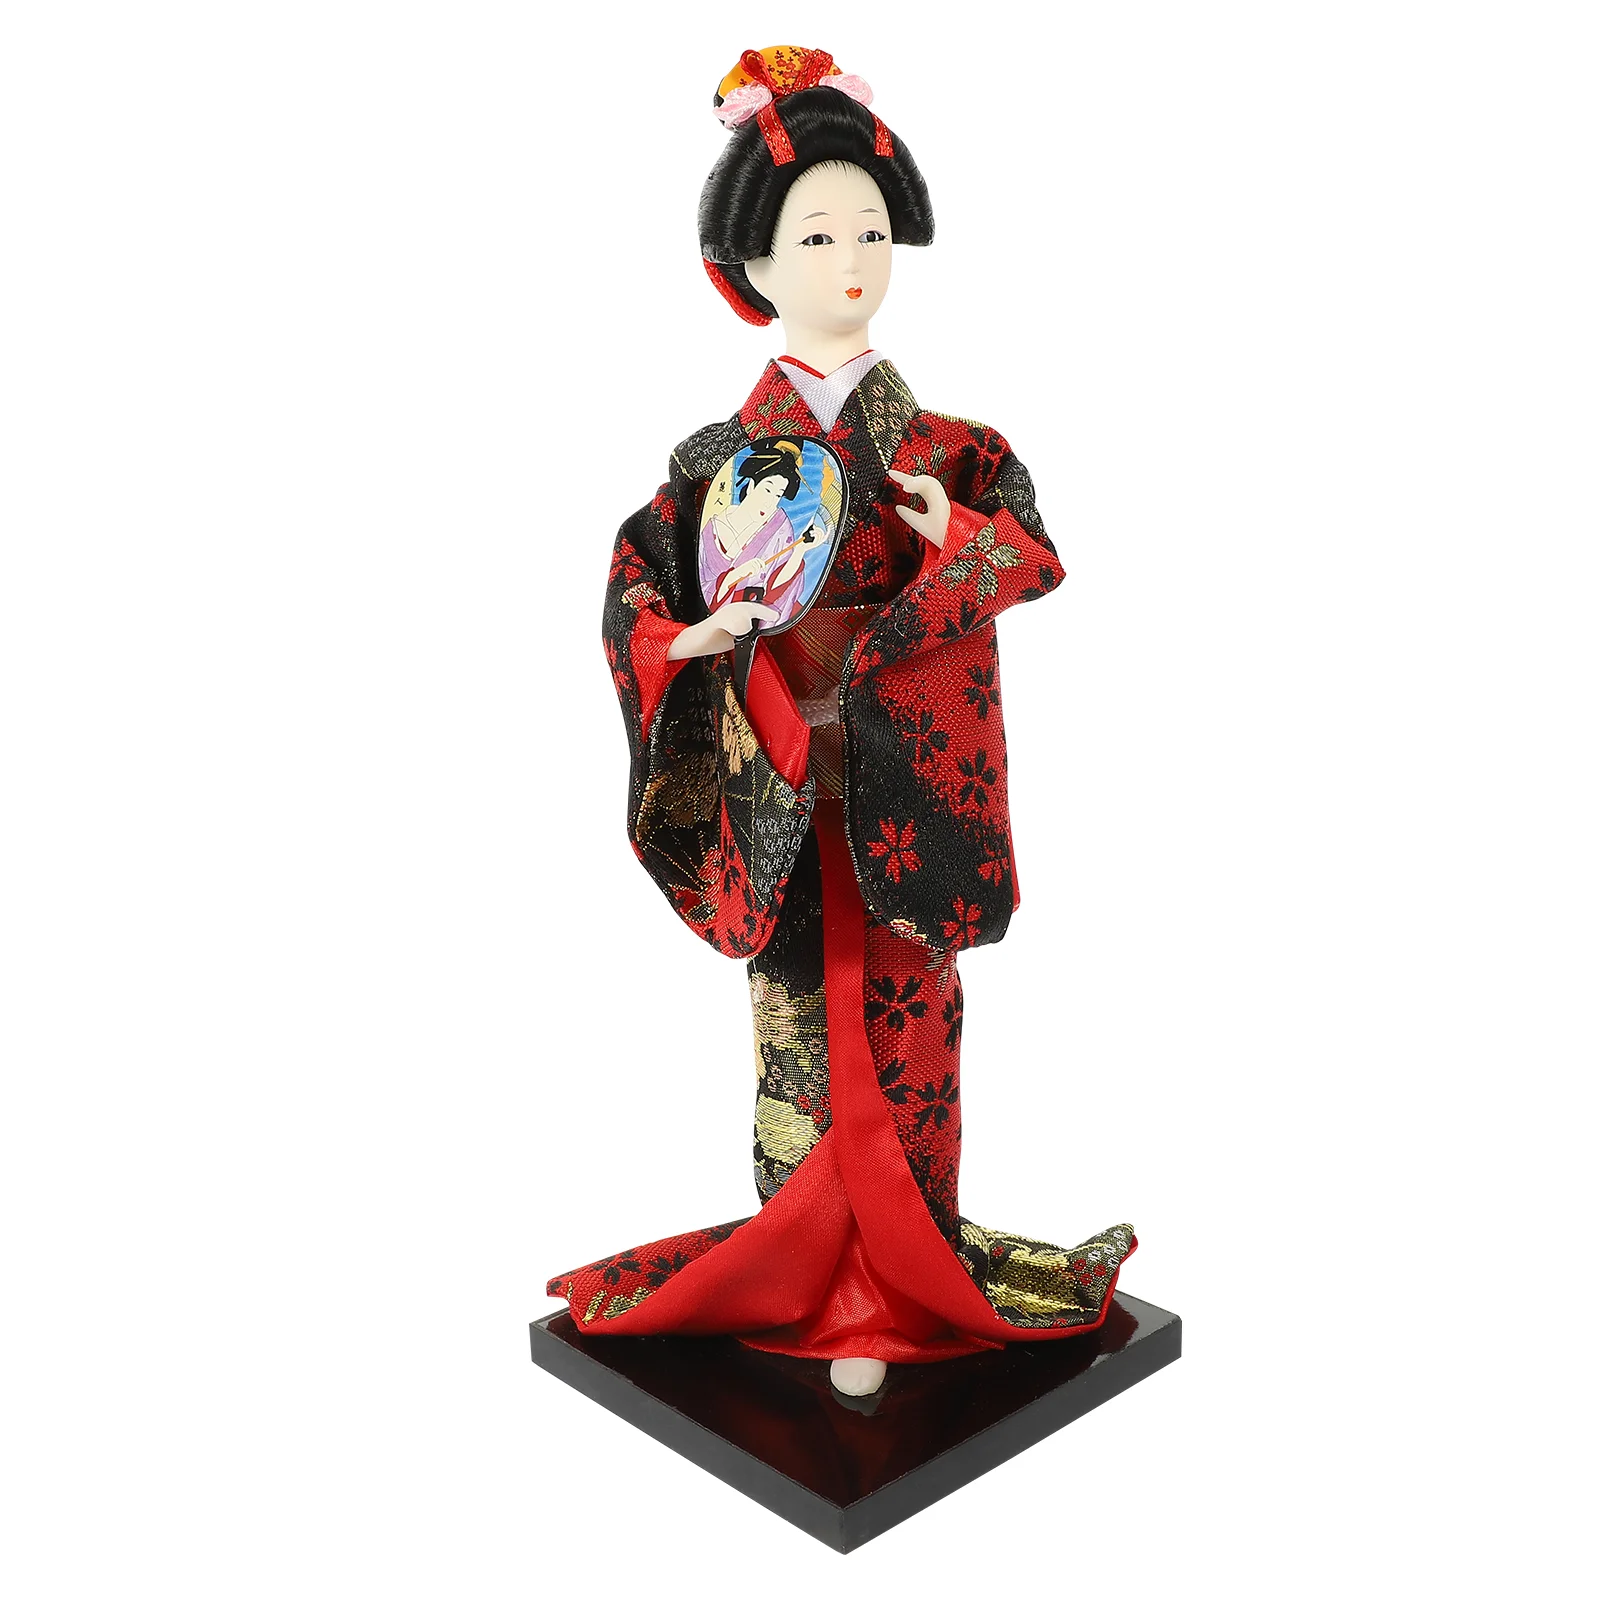 

Japanese Doll Folk Geisha Figurine Set Piece Girl Kimono Doll Arts And Crafts Accessories Decorate The Table With Random Colors